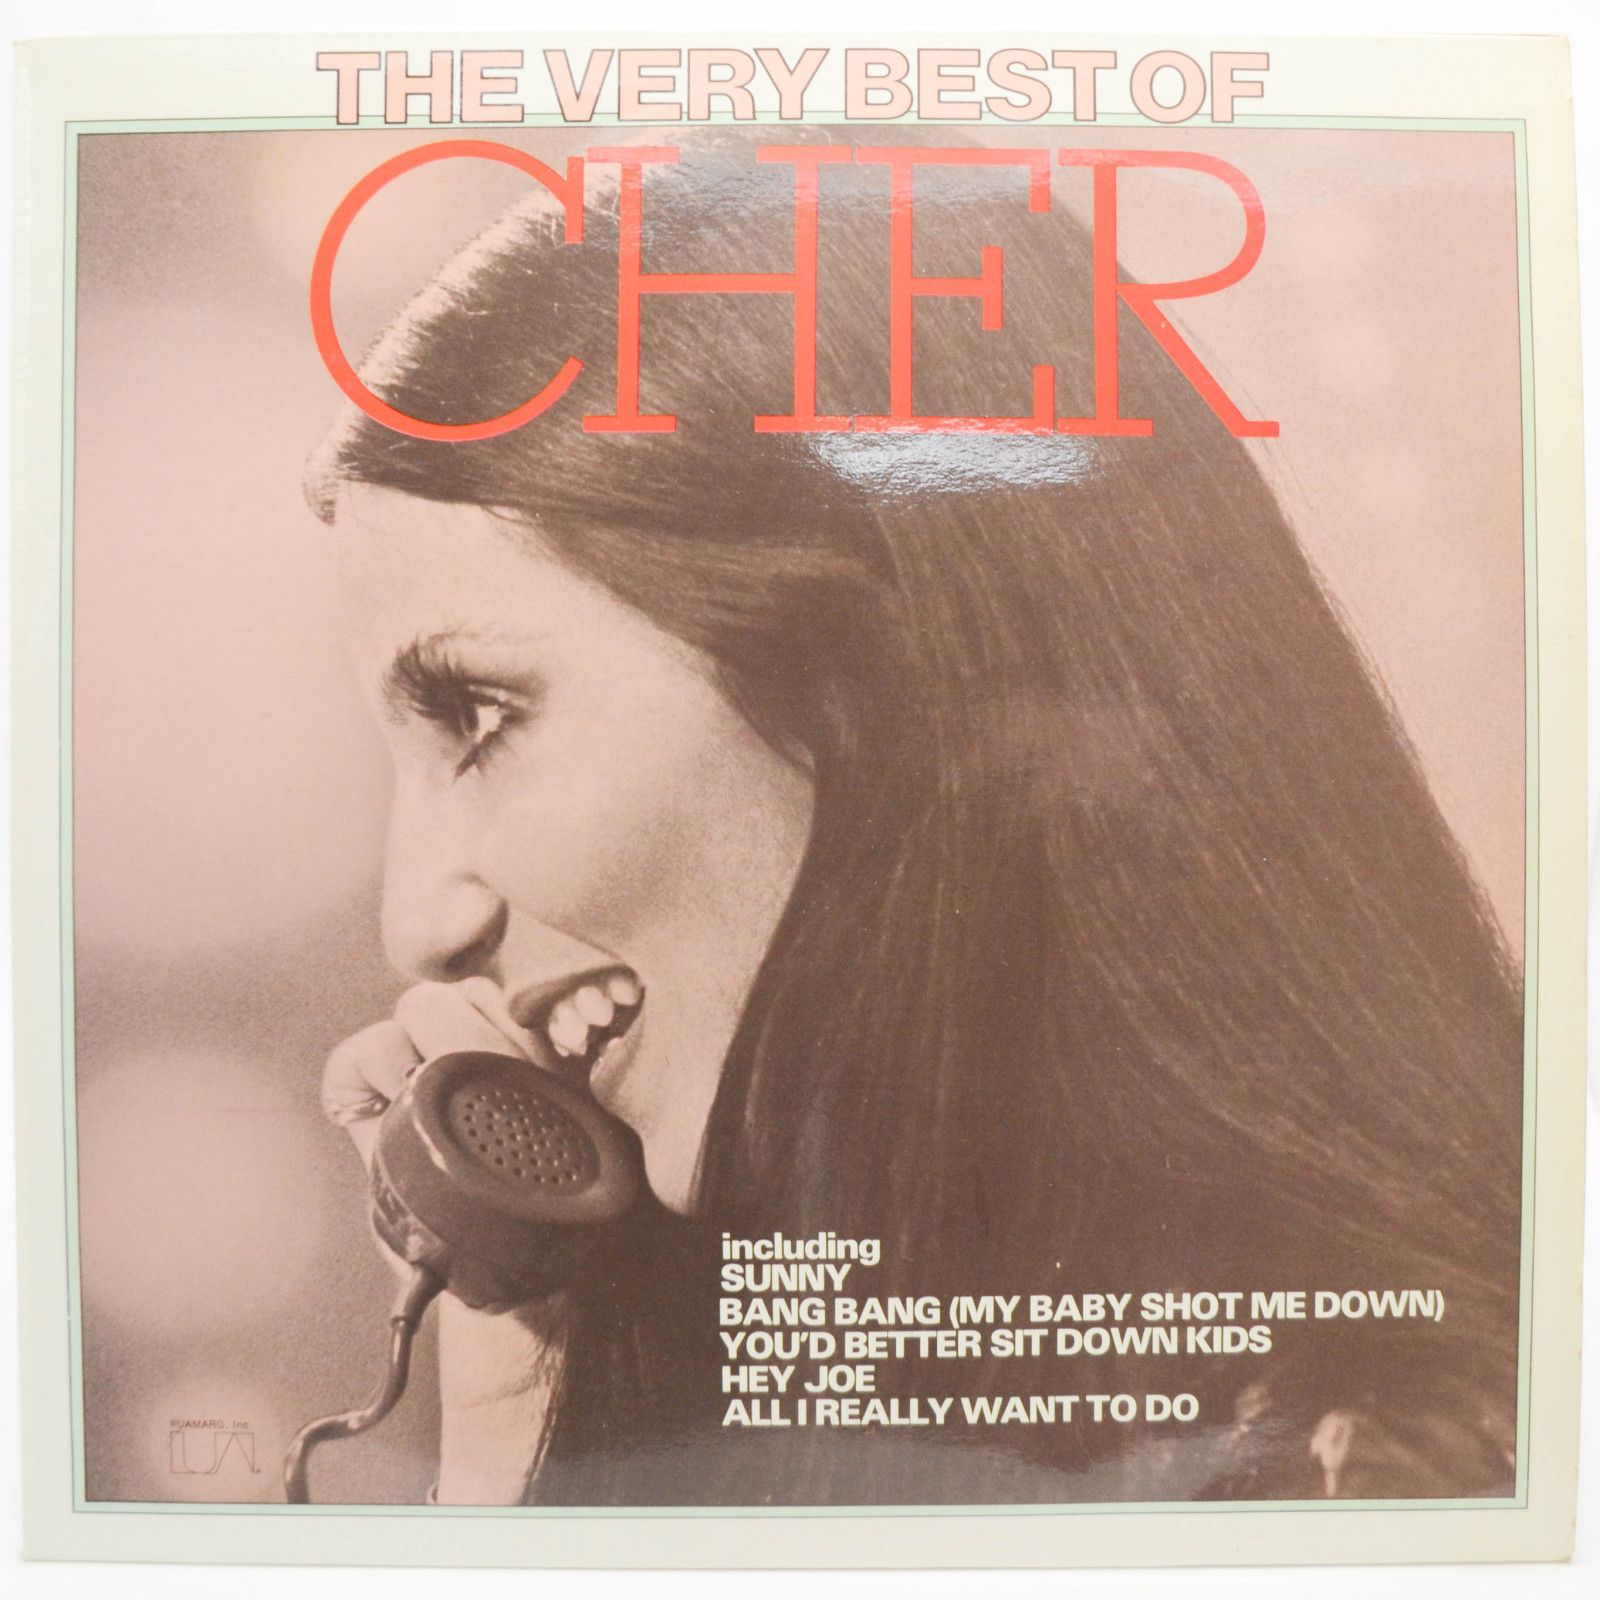 Cher — The Very Best Of Cher, 1975